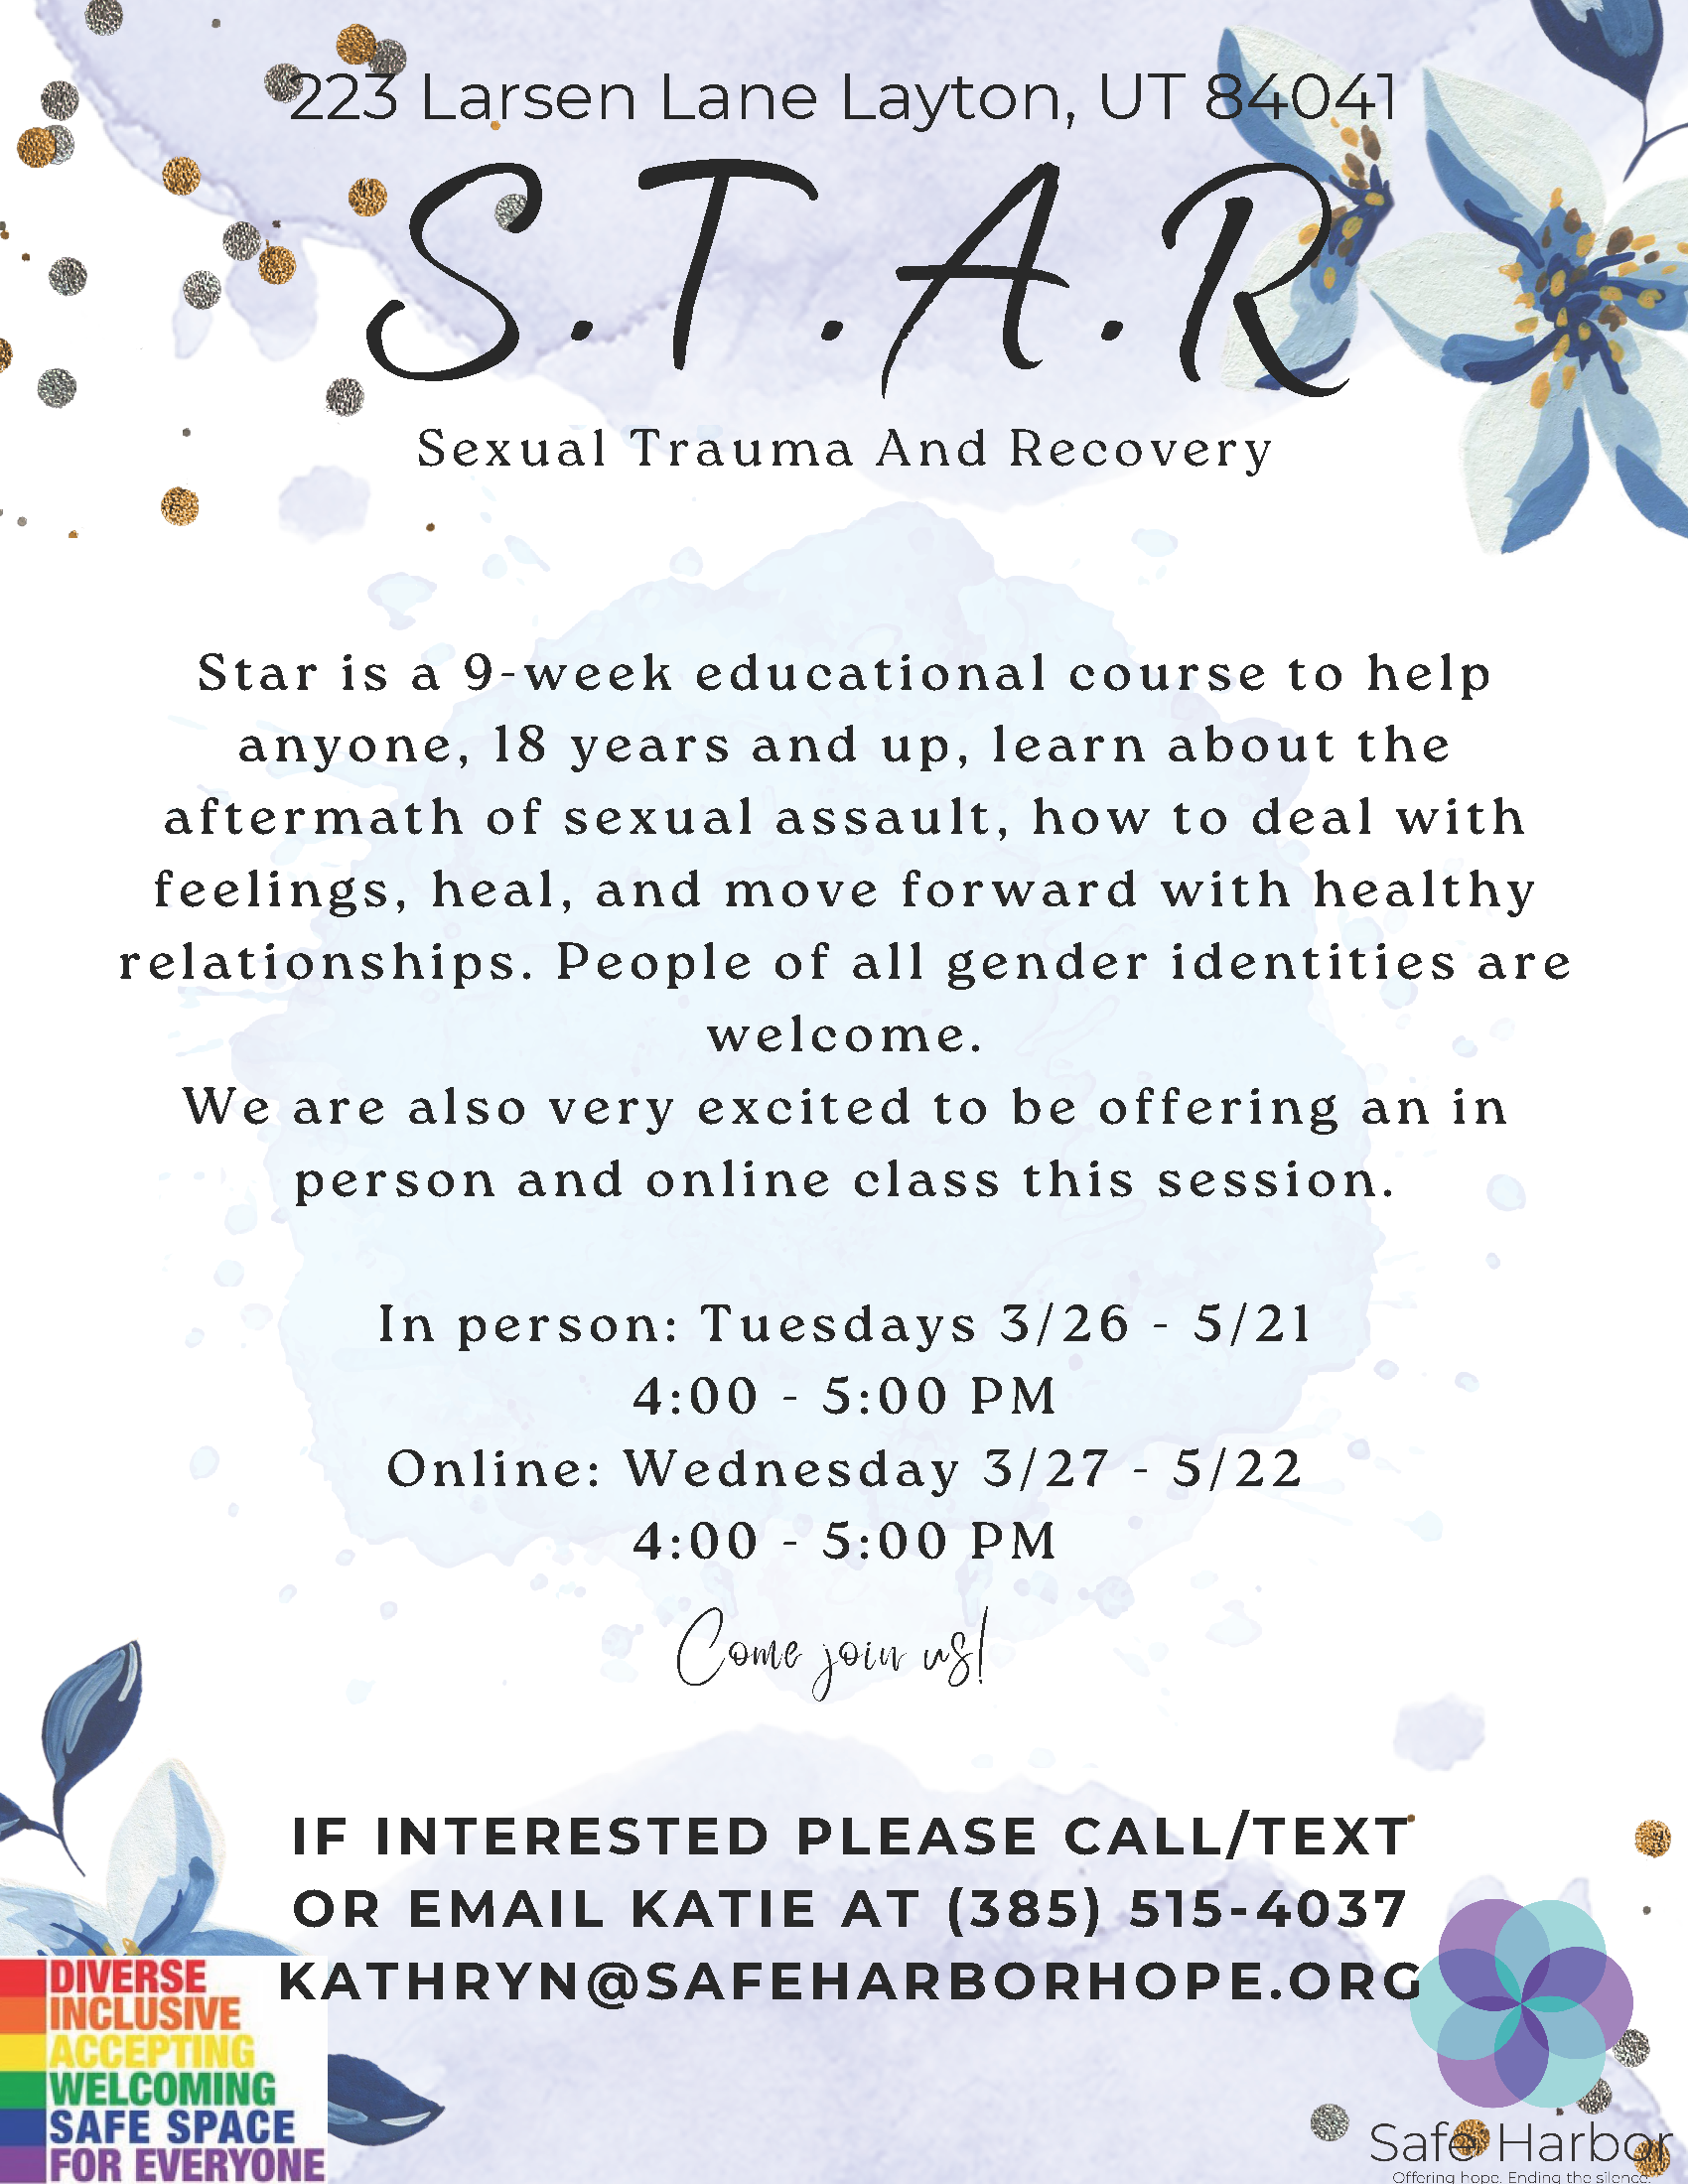 Adult Sexual Trauma And Recovery (S.T.A.R.) 9-week courses (one is online and the other in person) starting at the end of March